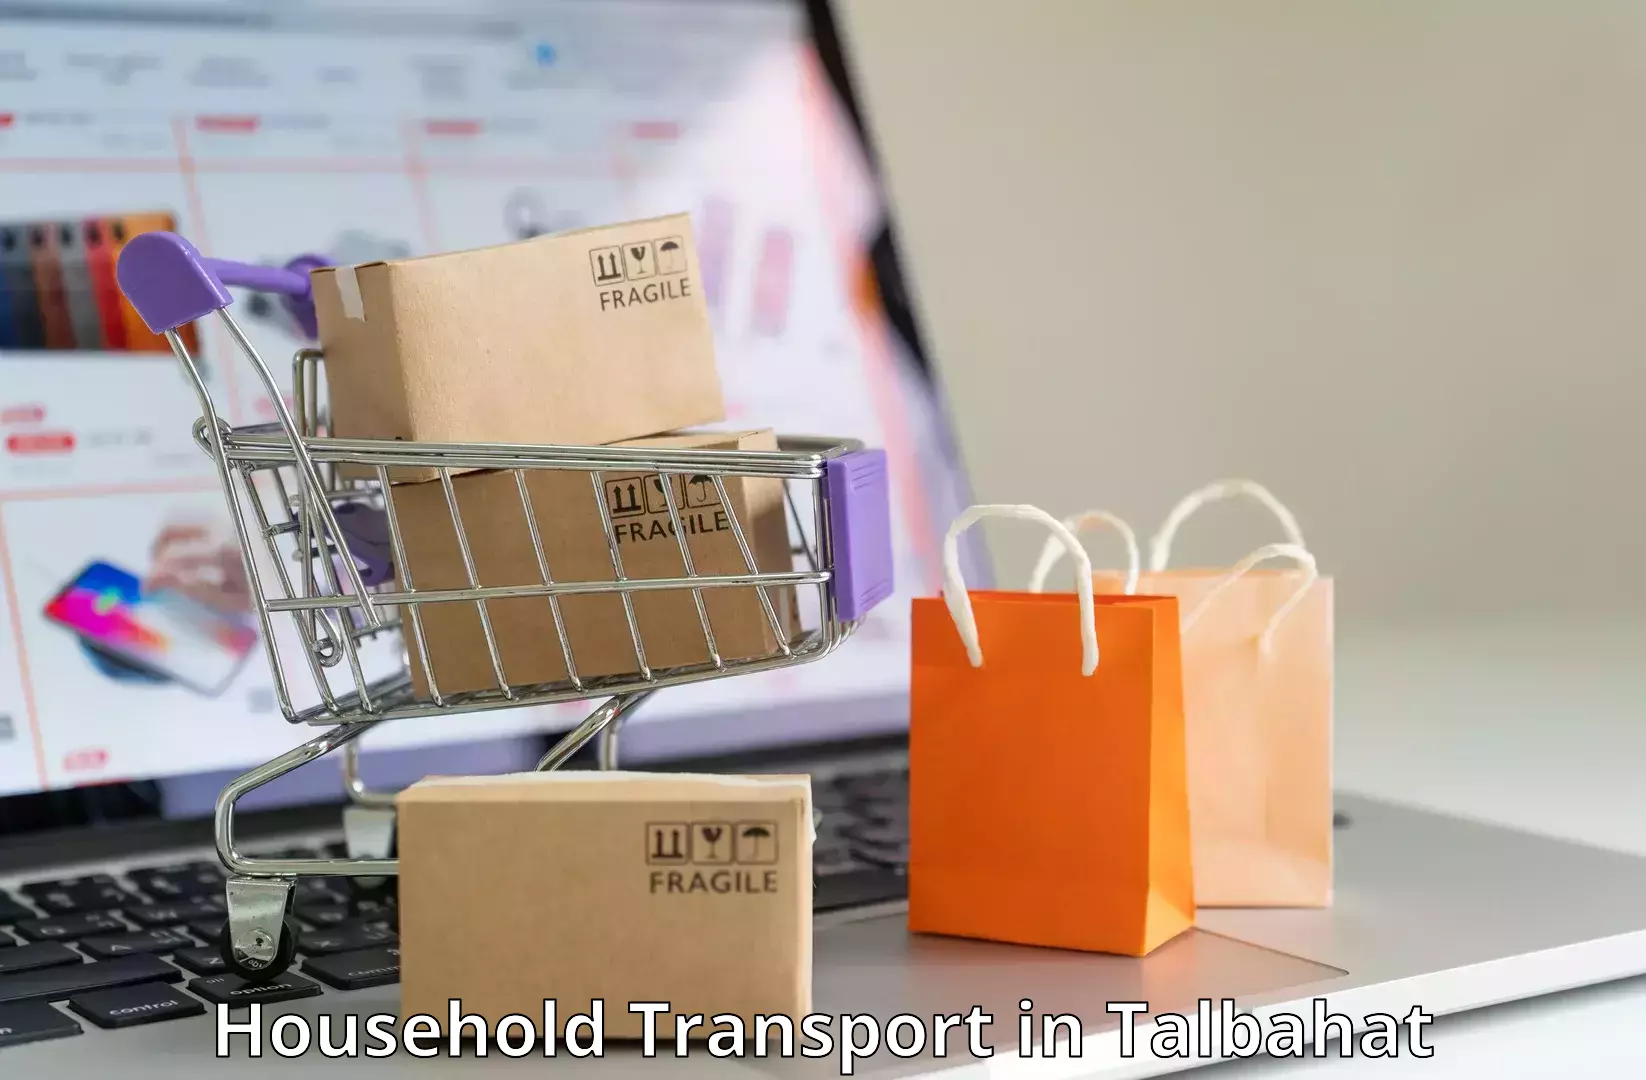 Household goods delivery in Talbahat